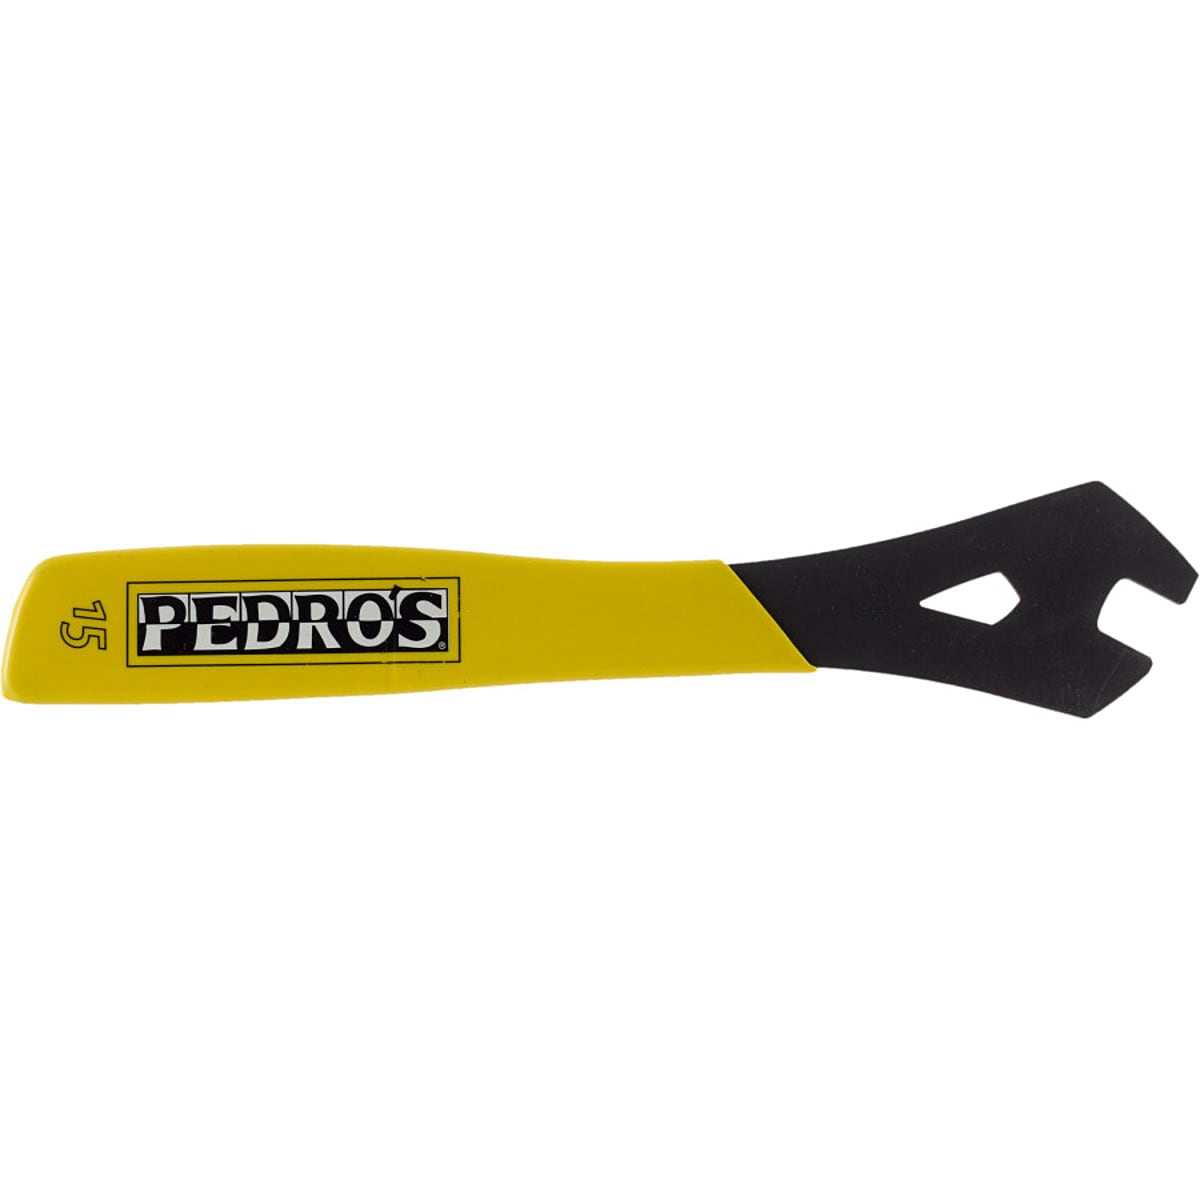 Pedros Pro Pedal Wrench